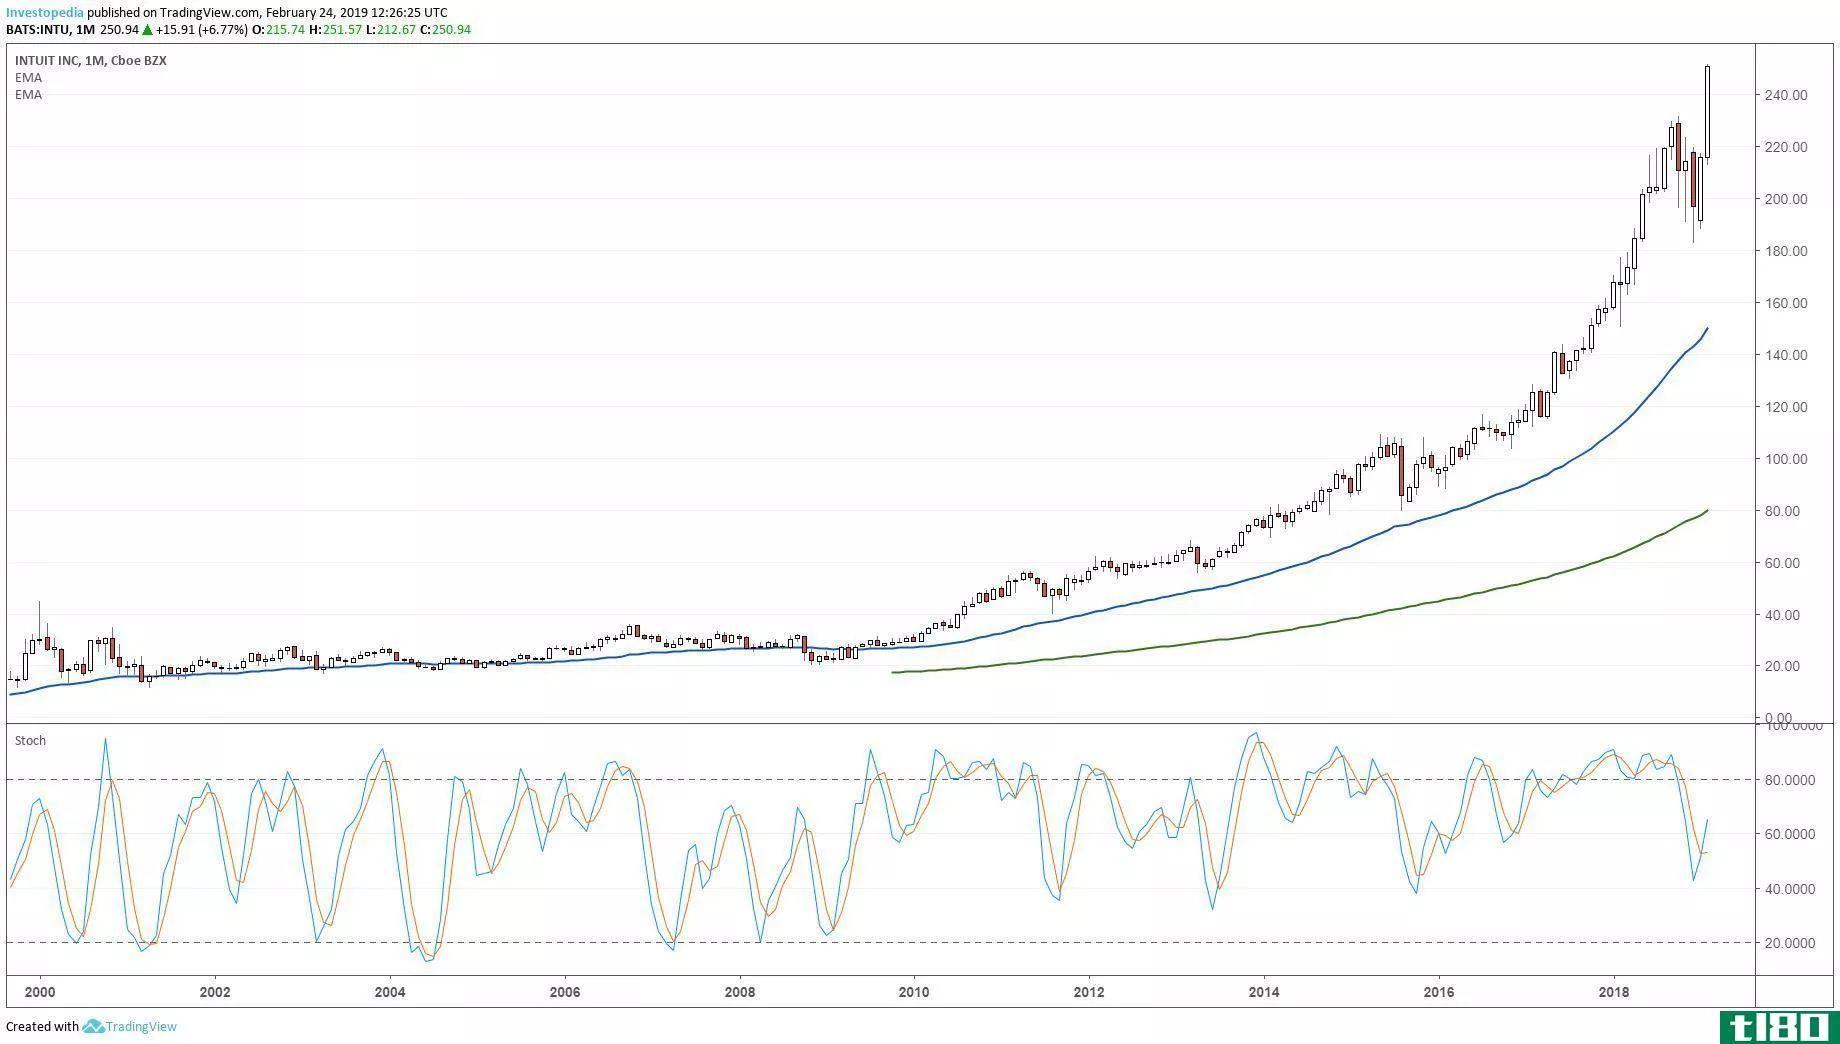 Long-term technical chart showing the share price performance of Intuit Inc. (INTU)